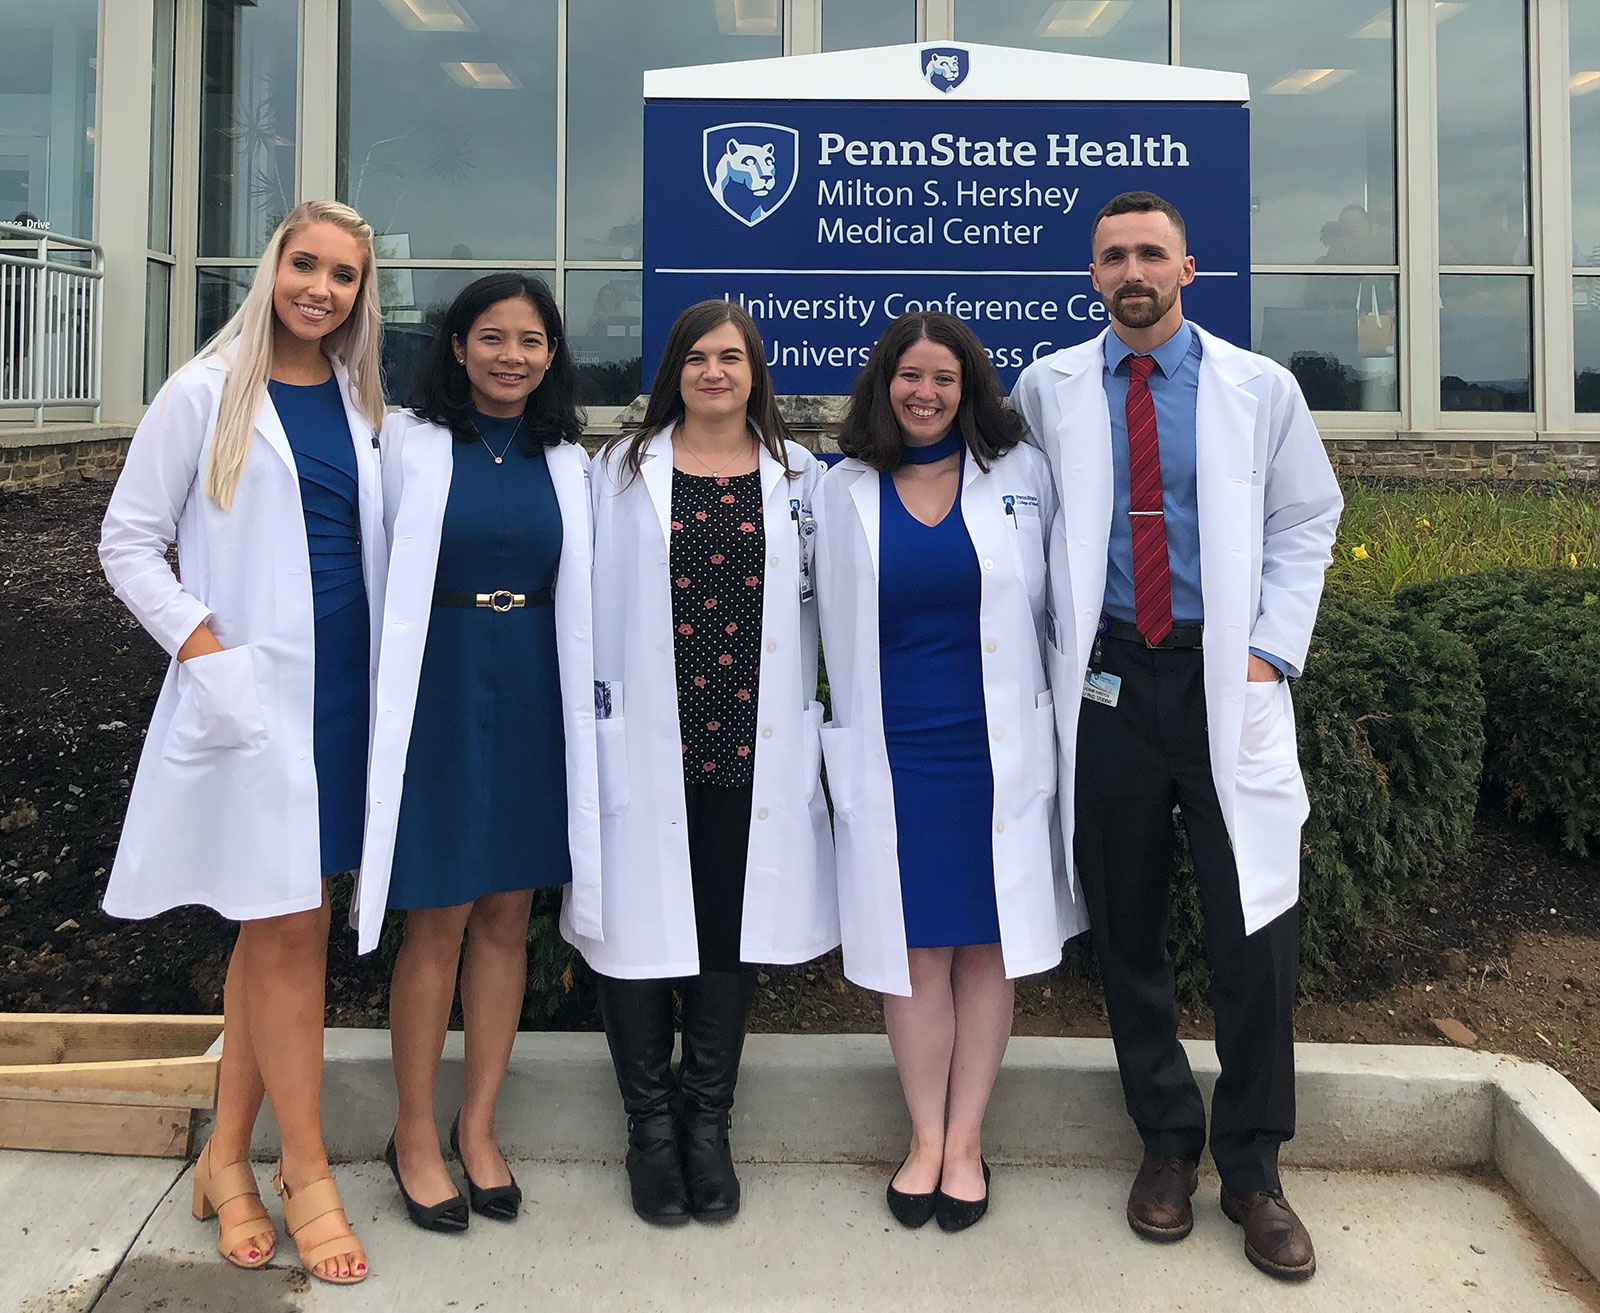 Five graduate students are seen wearing long laboratory coats and dress clothes, standing in front of a Penn State Health conference center in August 2019.